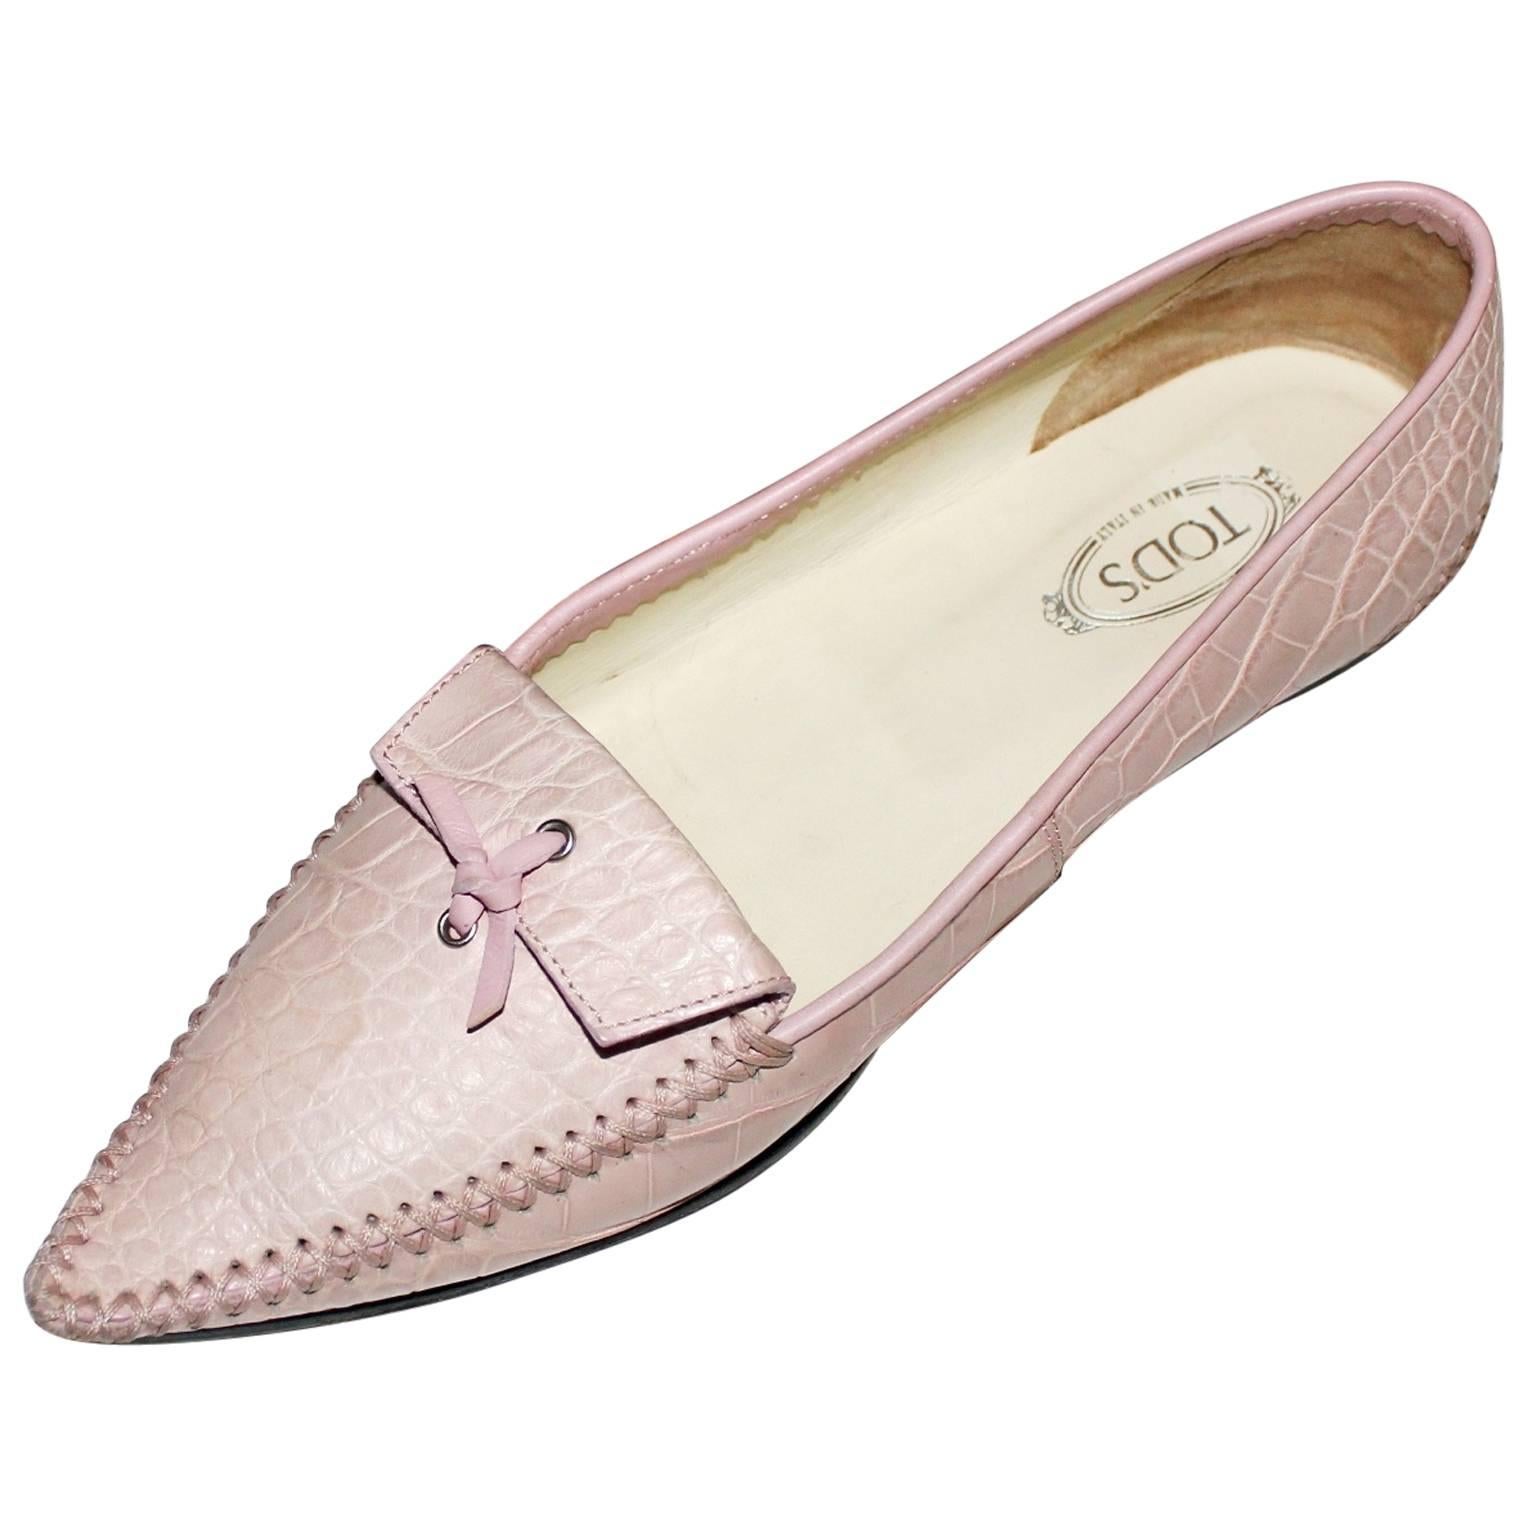 TOD'S Exotic Crocodile Skin Moccassin Loafer